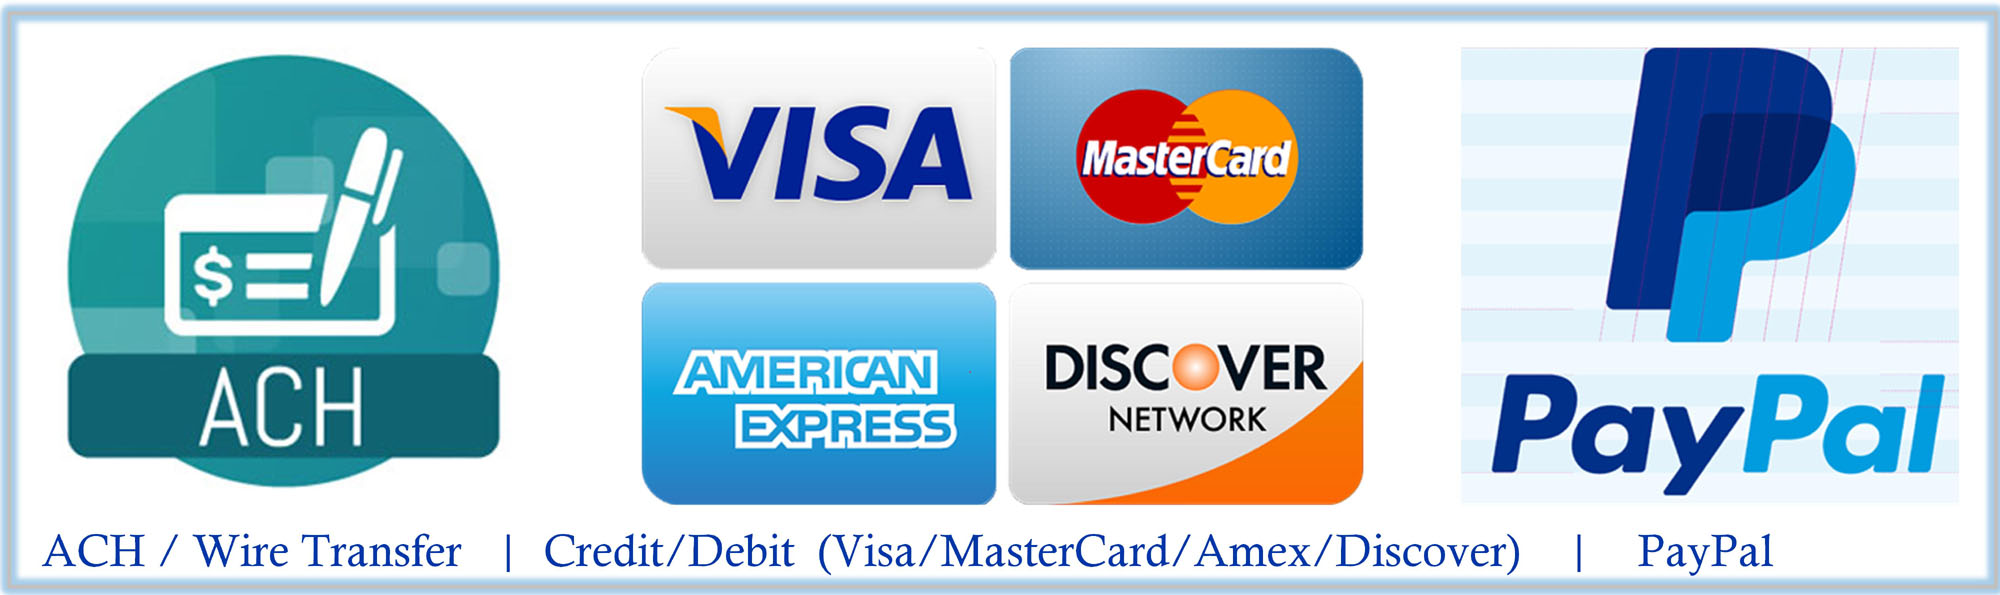 Payment options image2